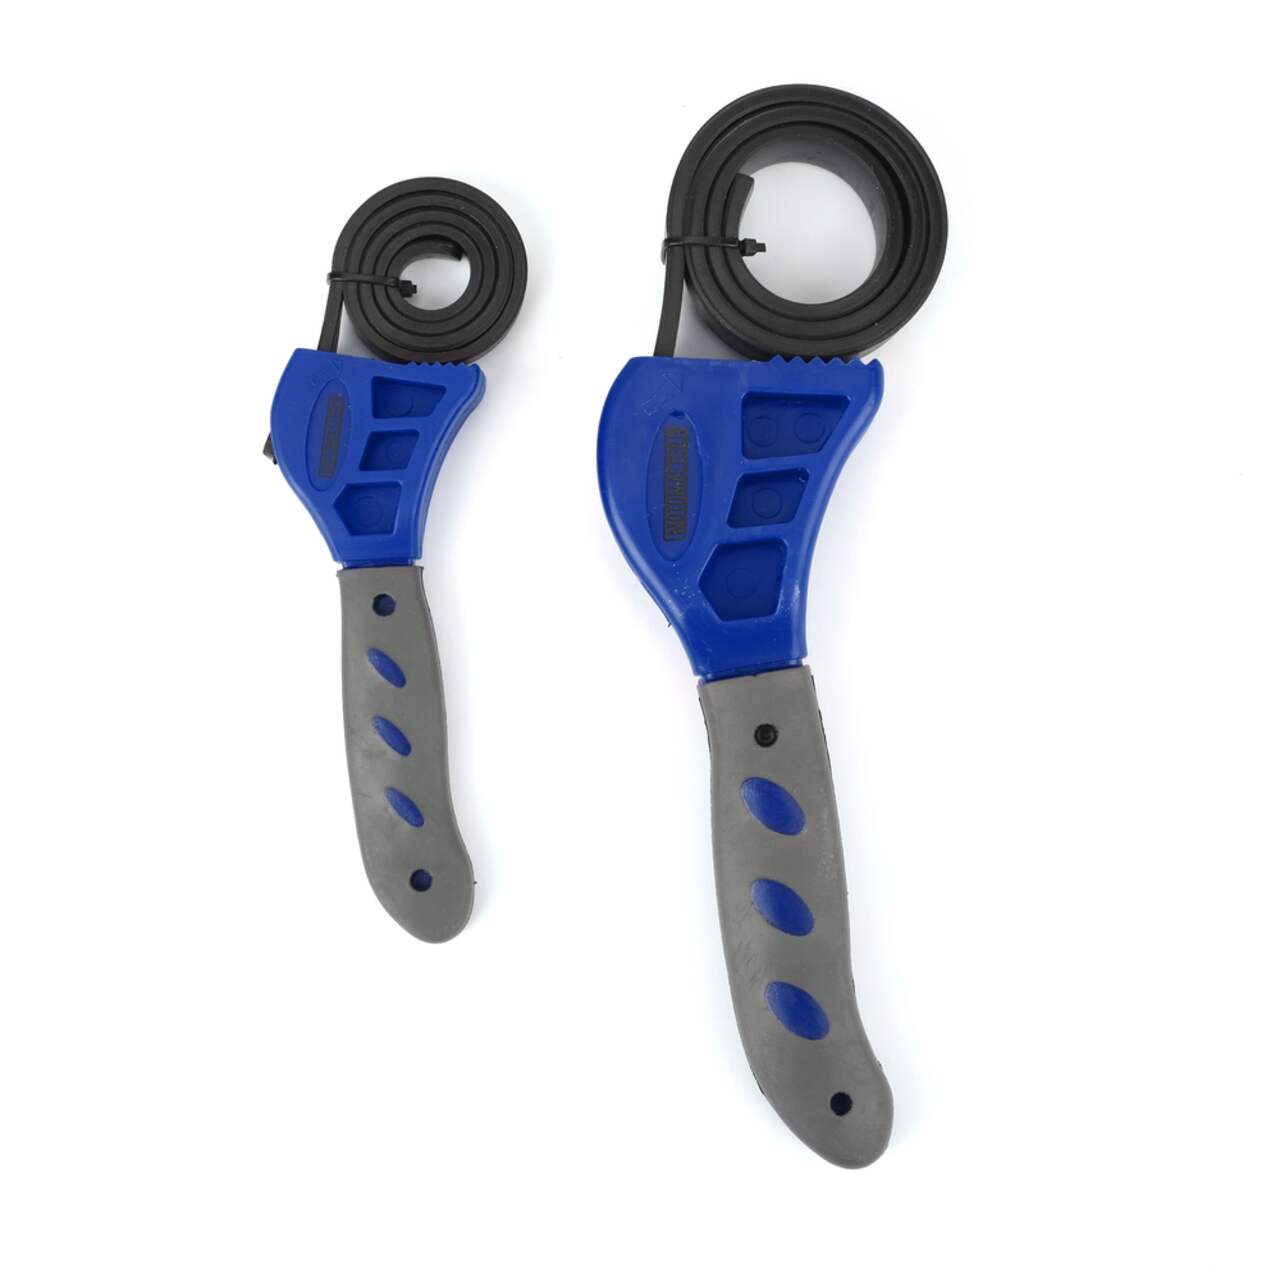 Certified Universal Strap Wrench, 2-pk, Assorted Sizes